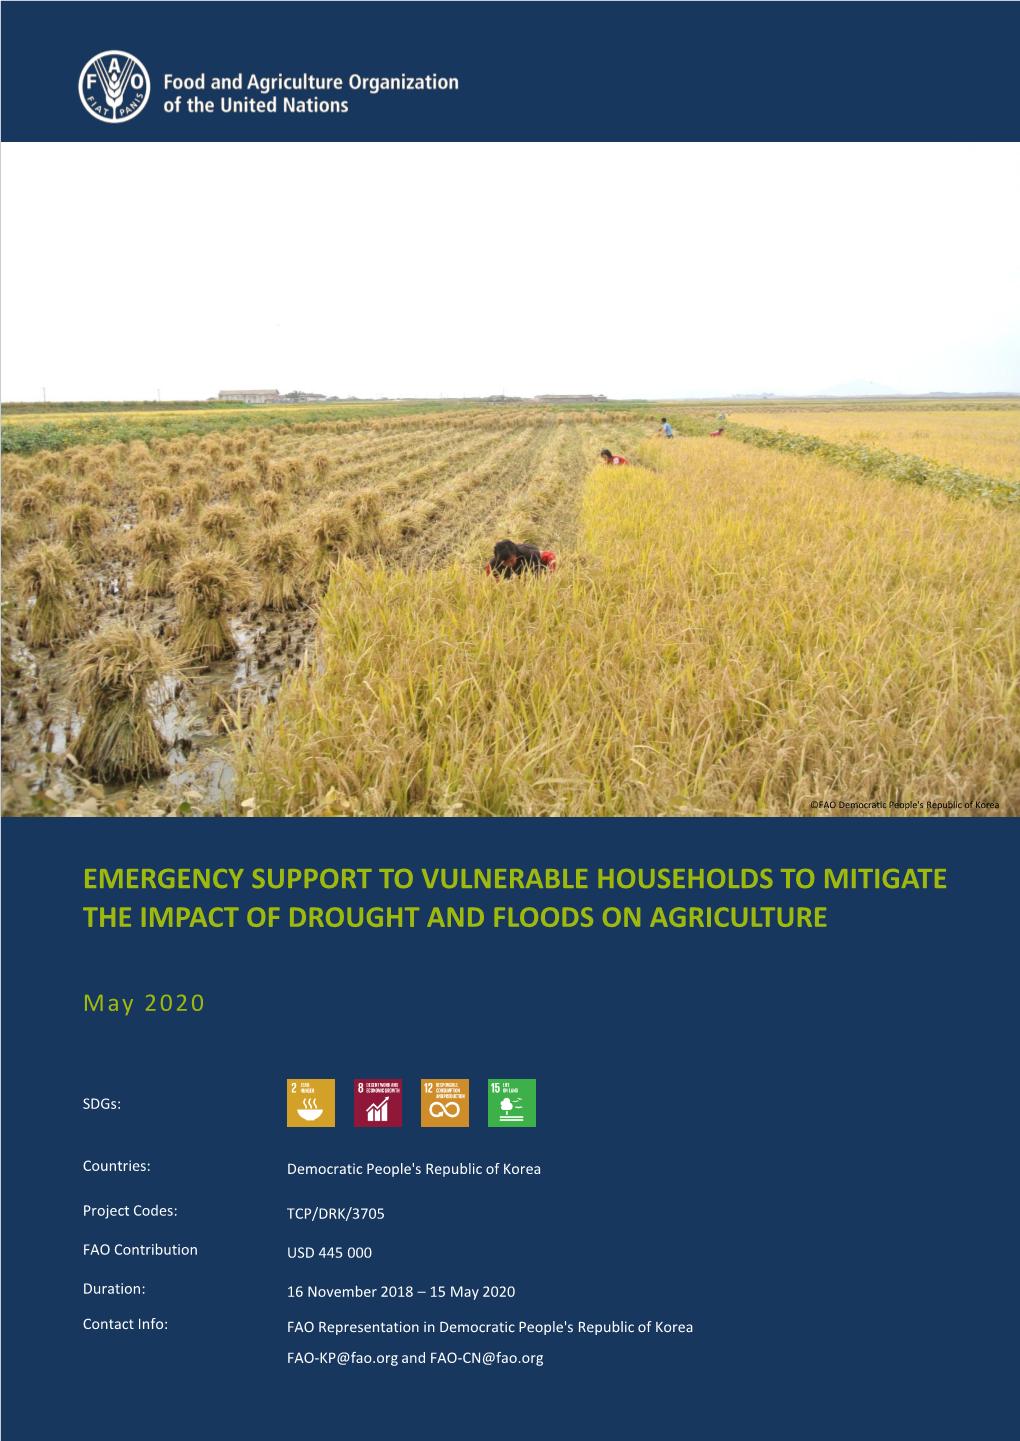 Emergency Support to Vulnerable Households to Mitigate the Impact of Drought and Floods on Agriculture